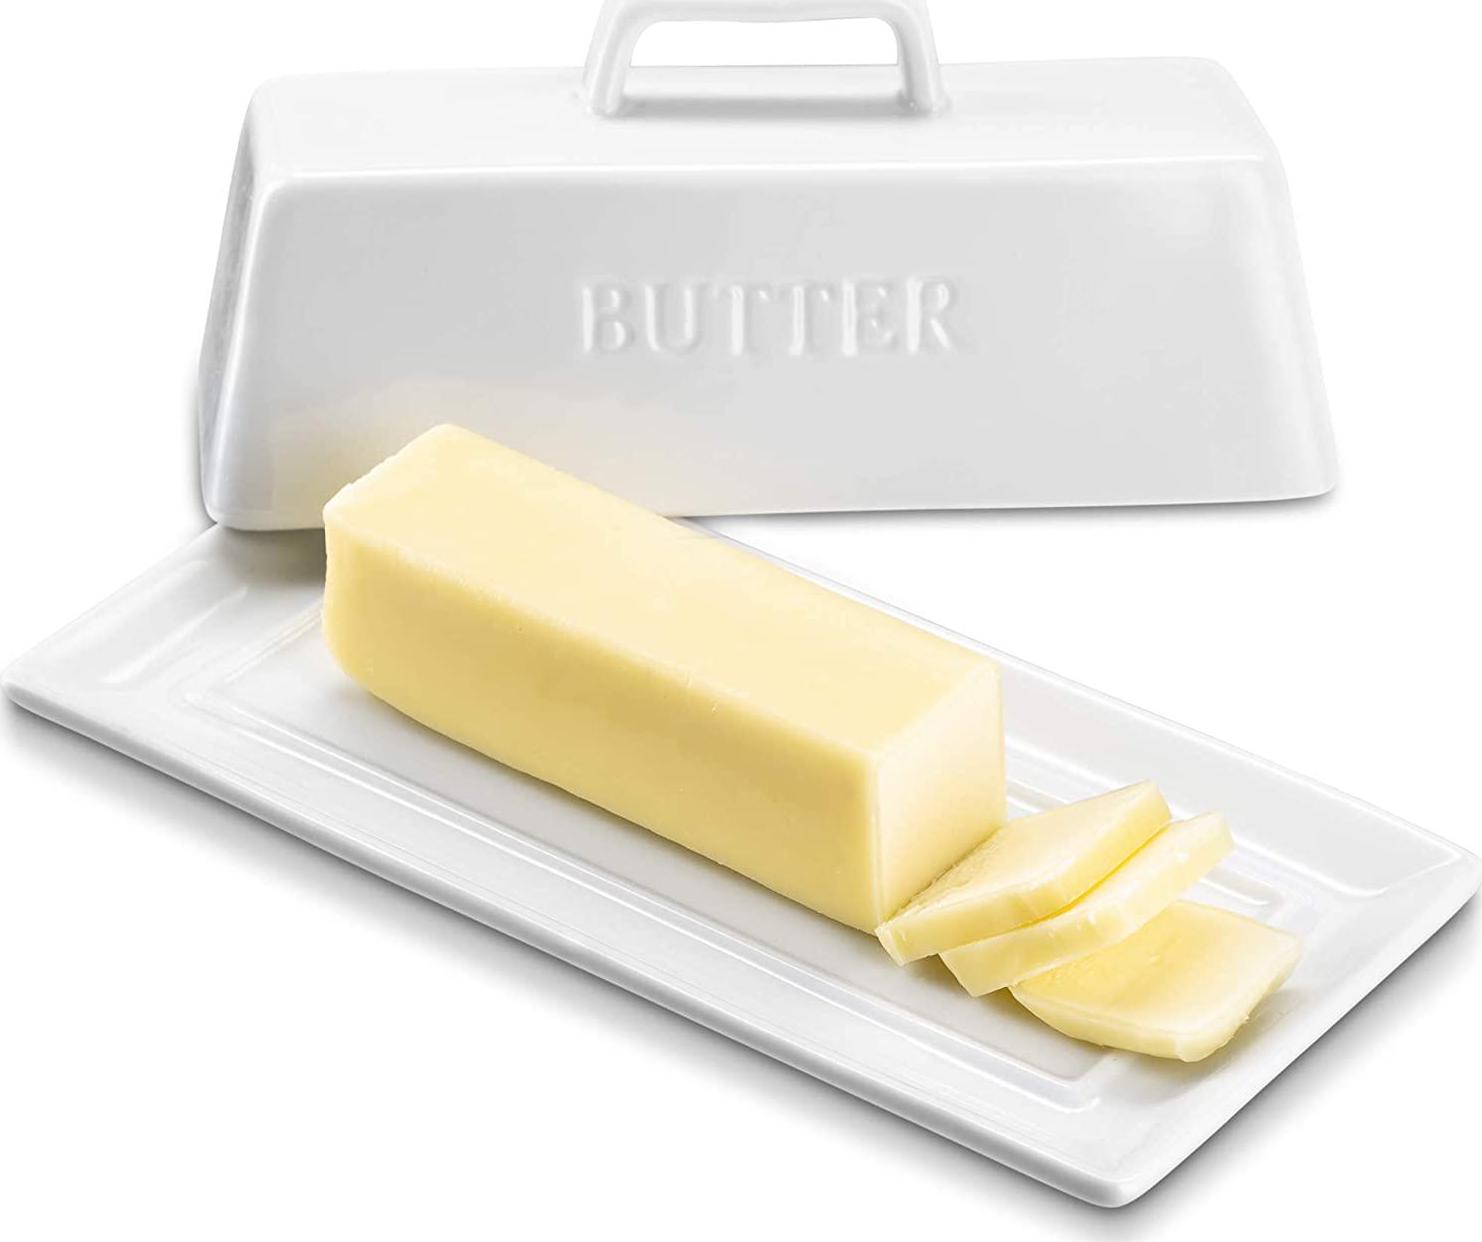 KooK, Kook Ceramic Butter Dish with Lid, Kitchen Countertop Butter Keeper, Serving Tray with Cover, Storage Container, Holds 1 Stick, Microwave and Dishwasher Safe, White